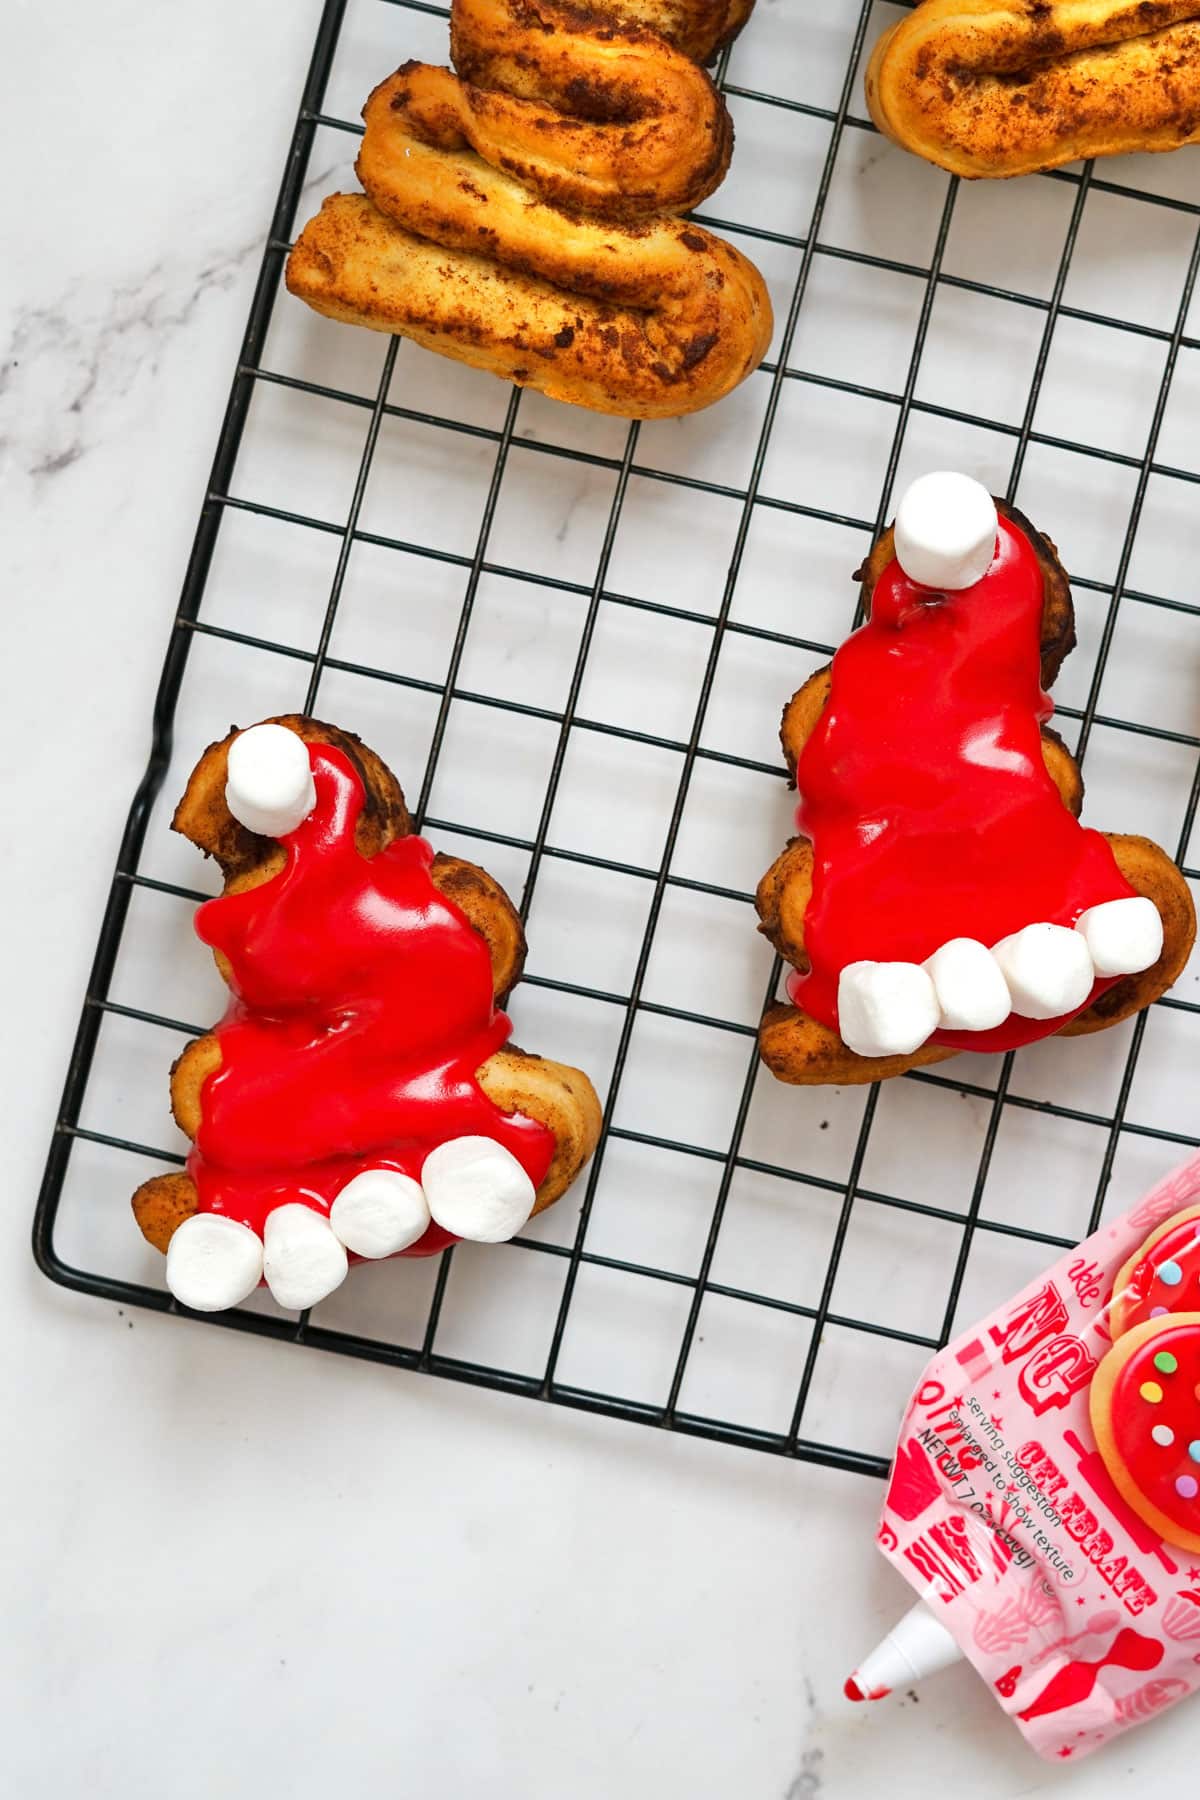 Cinnamon rolls in the shape of a Santa hat on a cooling rack with a few decorated with red icing and mini marshmallows.